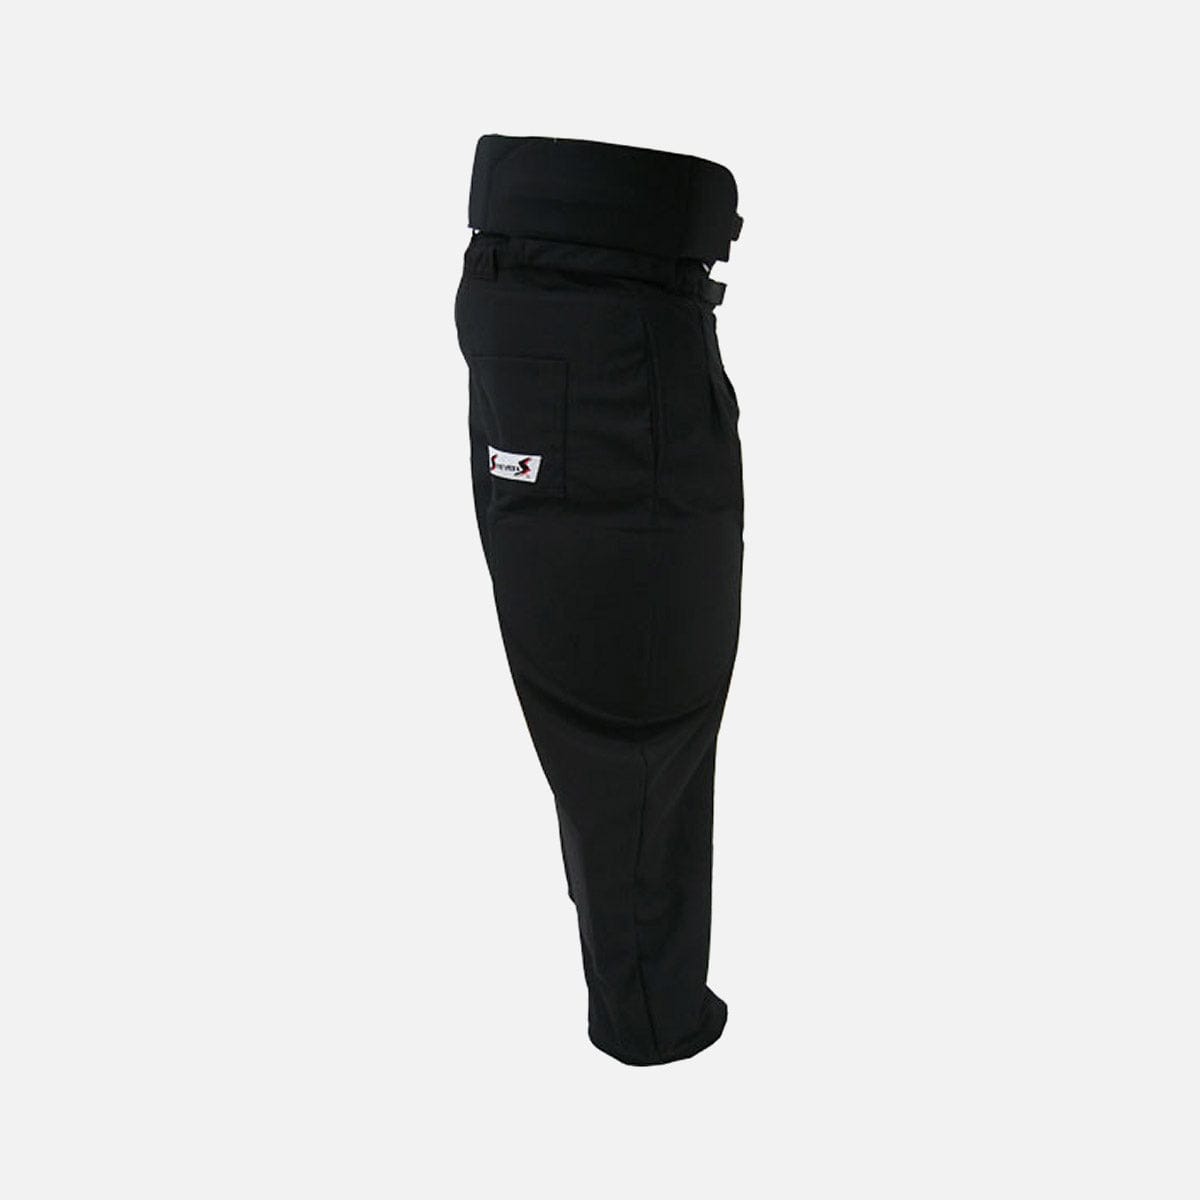 Bauer Referee Pants with integrated girdle – REFSTUFF